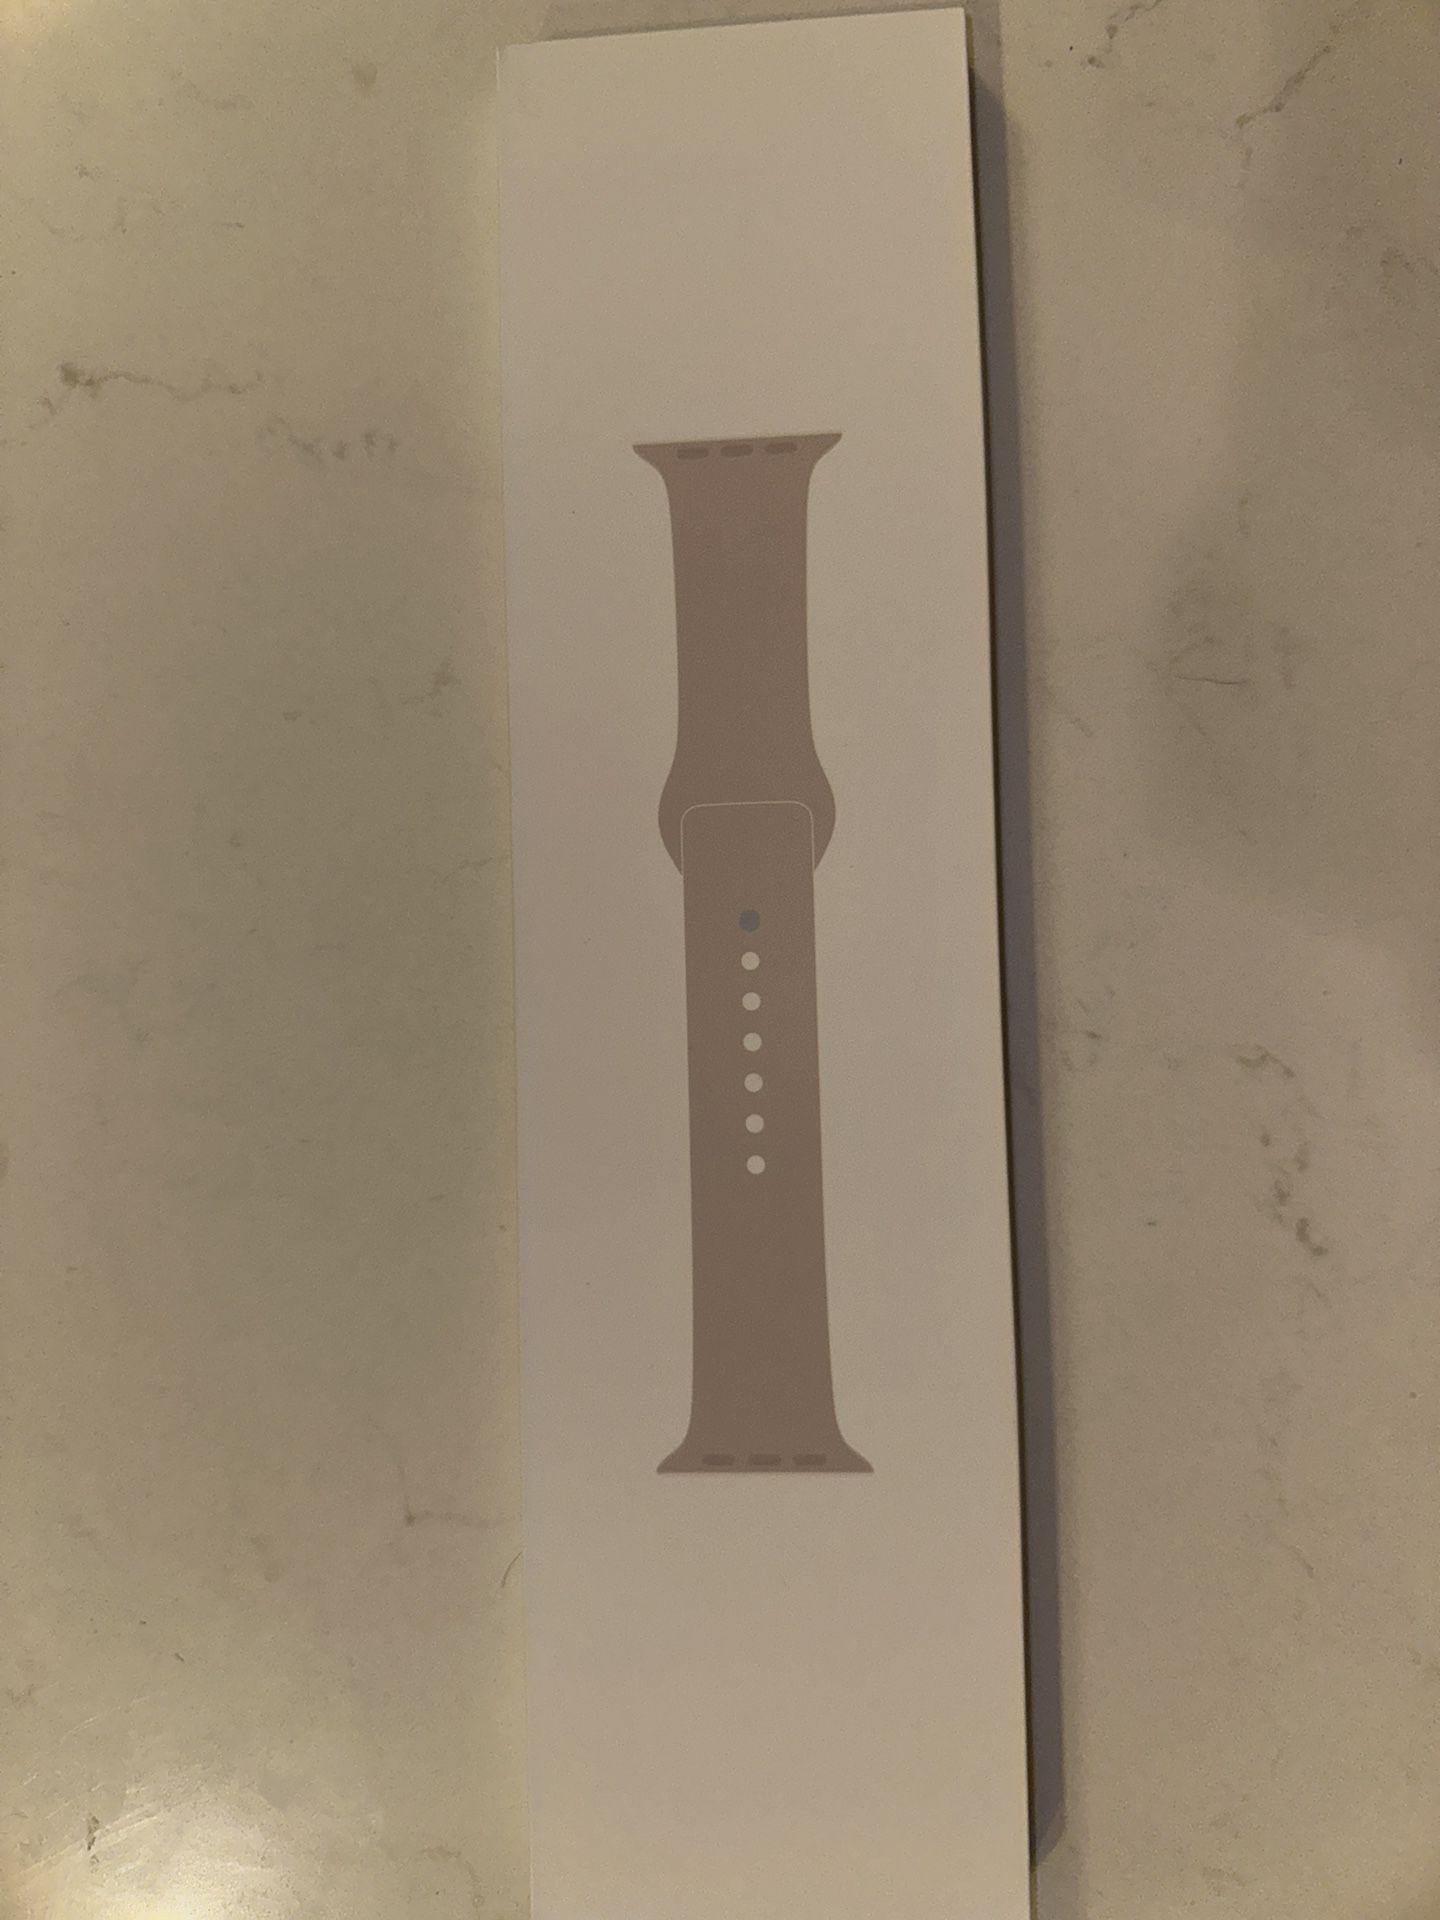 New Sealed 45mm Apple Watch Sport Band (starlight Color)